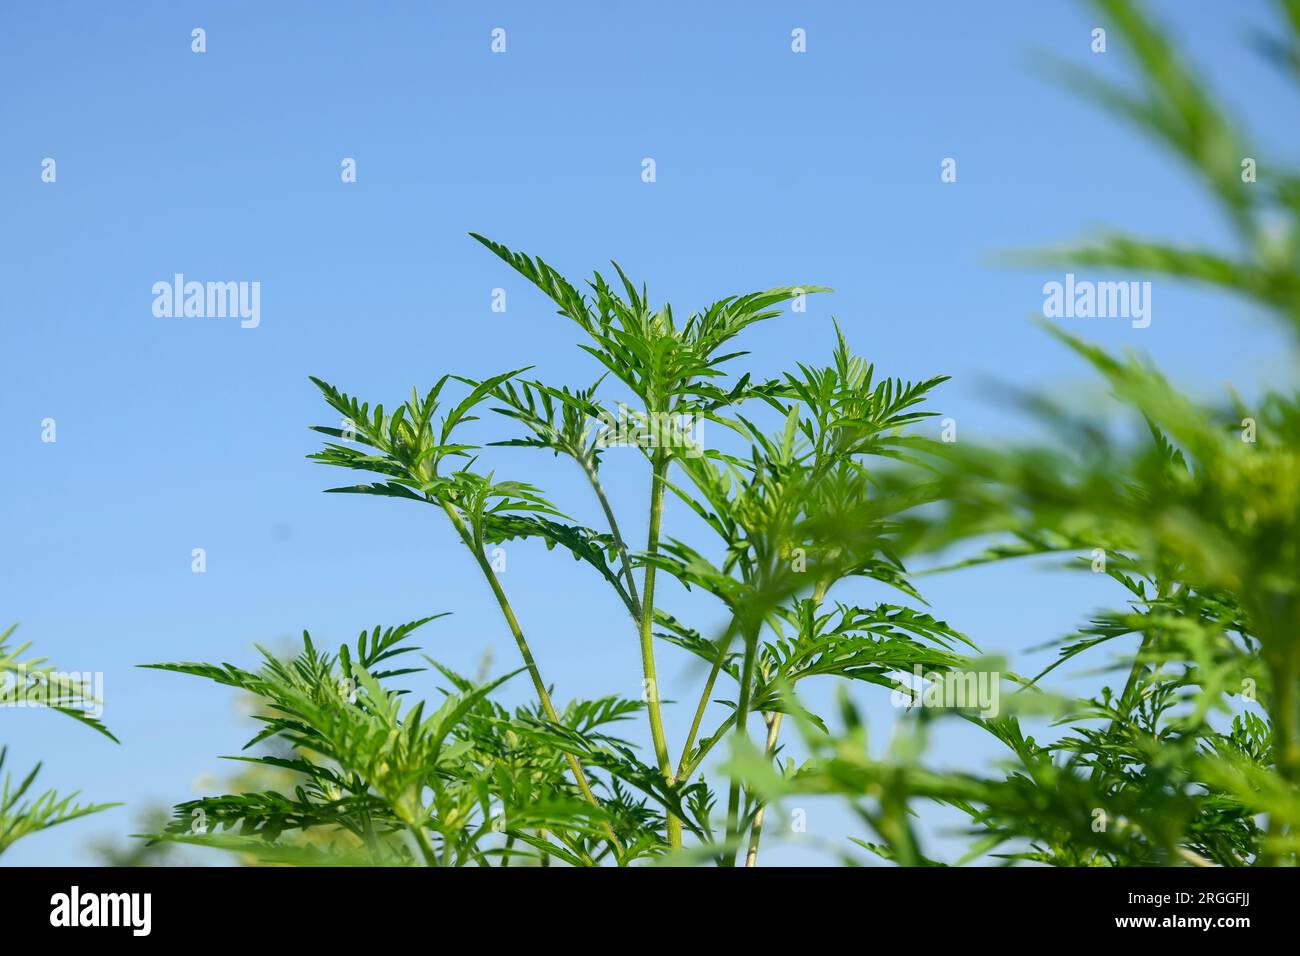 American common ragweed against blue cloudless sky. Dangerous plant. Ambrosia shrubs that causes allergic reactions, allergic rhinitis. Copy space. Se Stock Photo